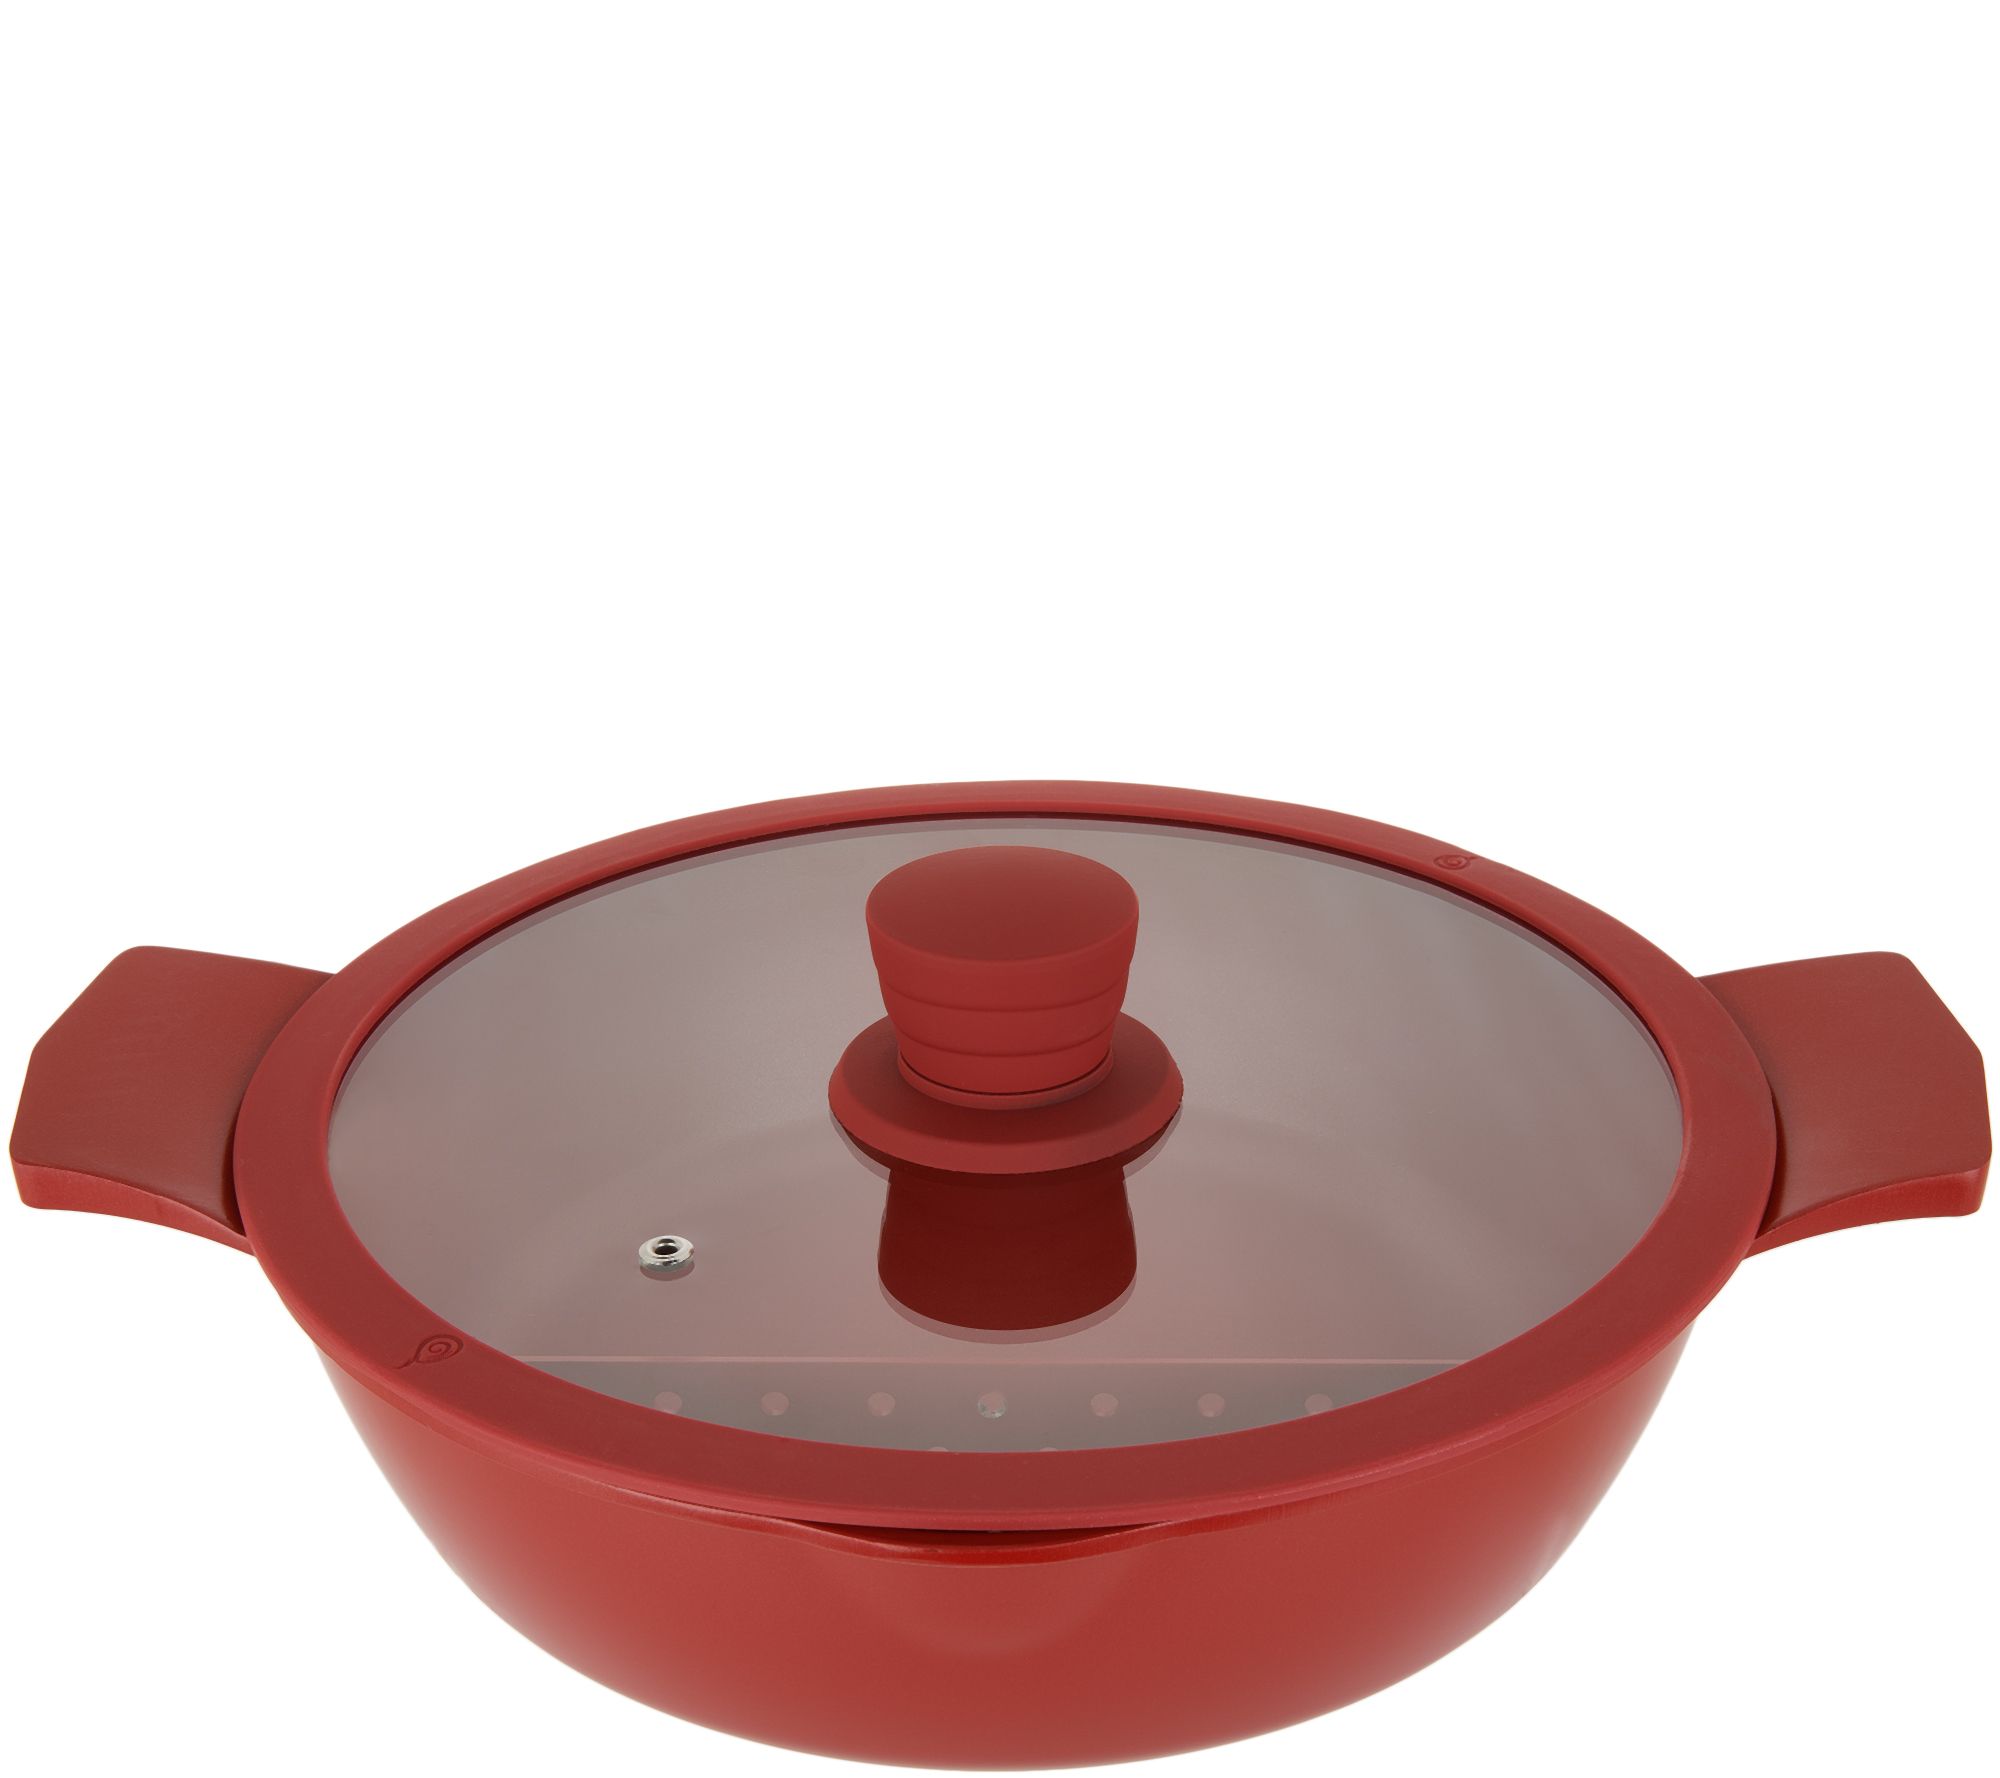 Dishwasher-washable frying pan steamer from CAINZ --Silicon lid